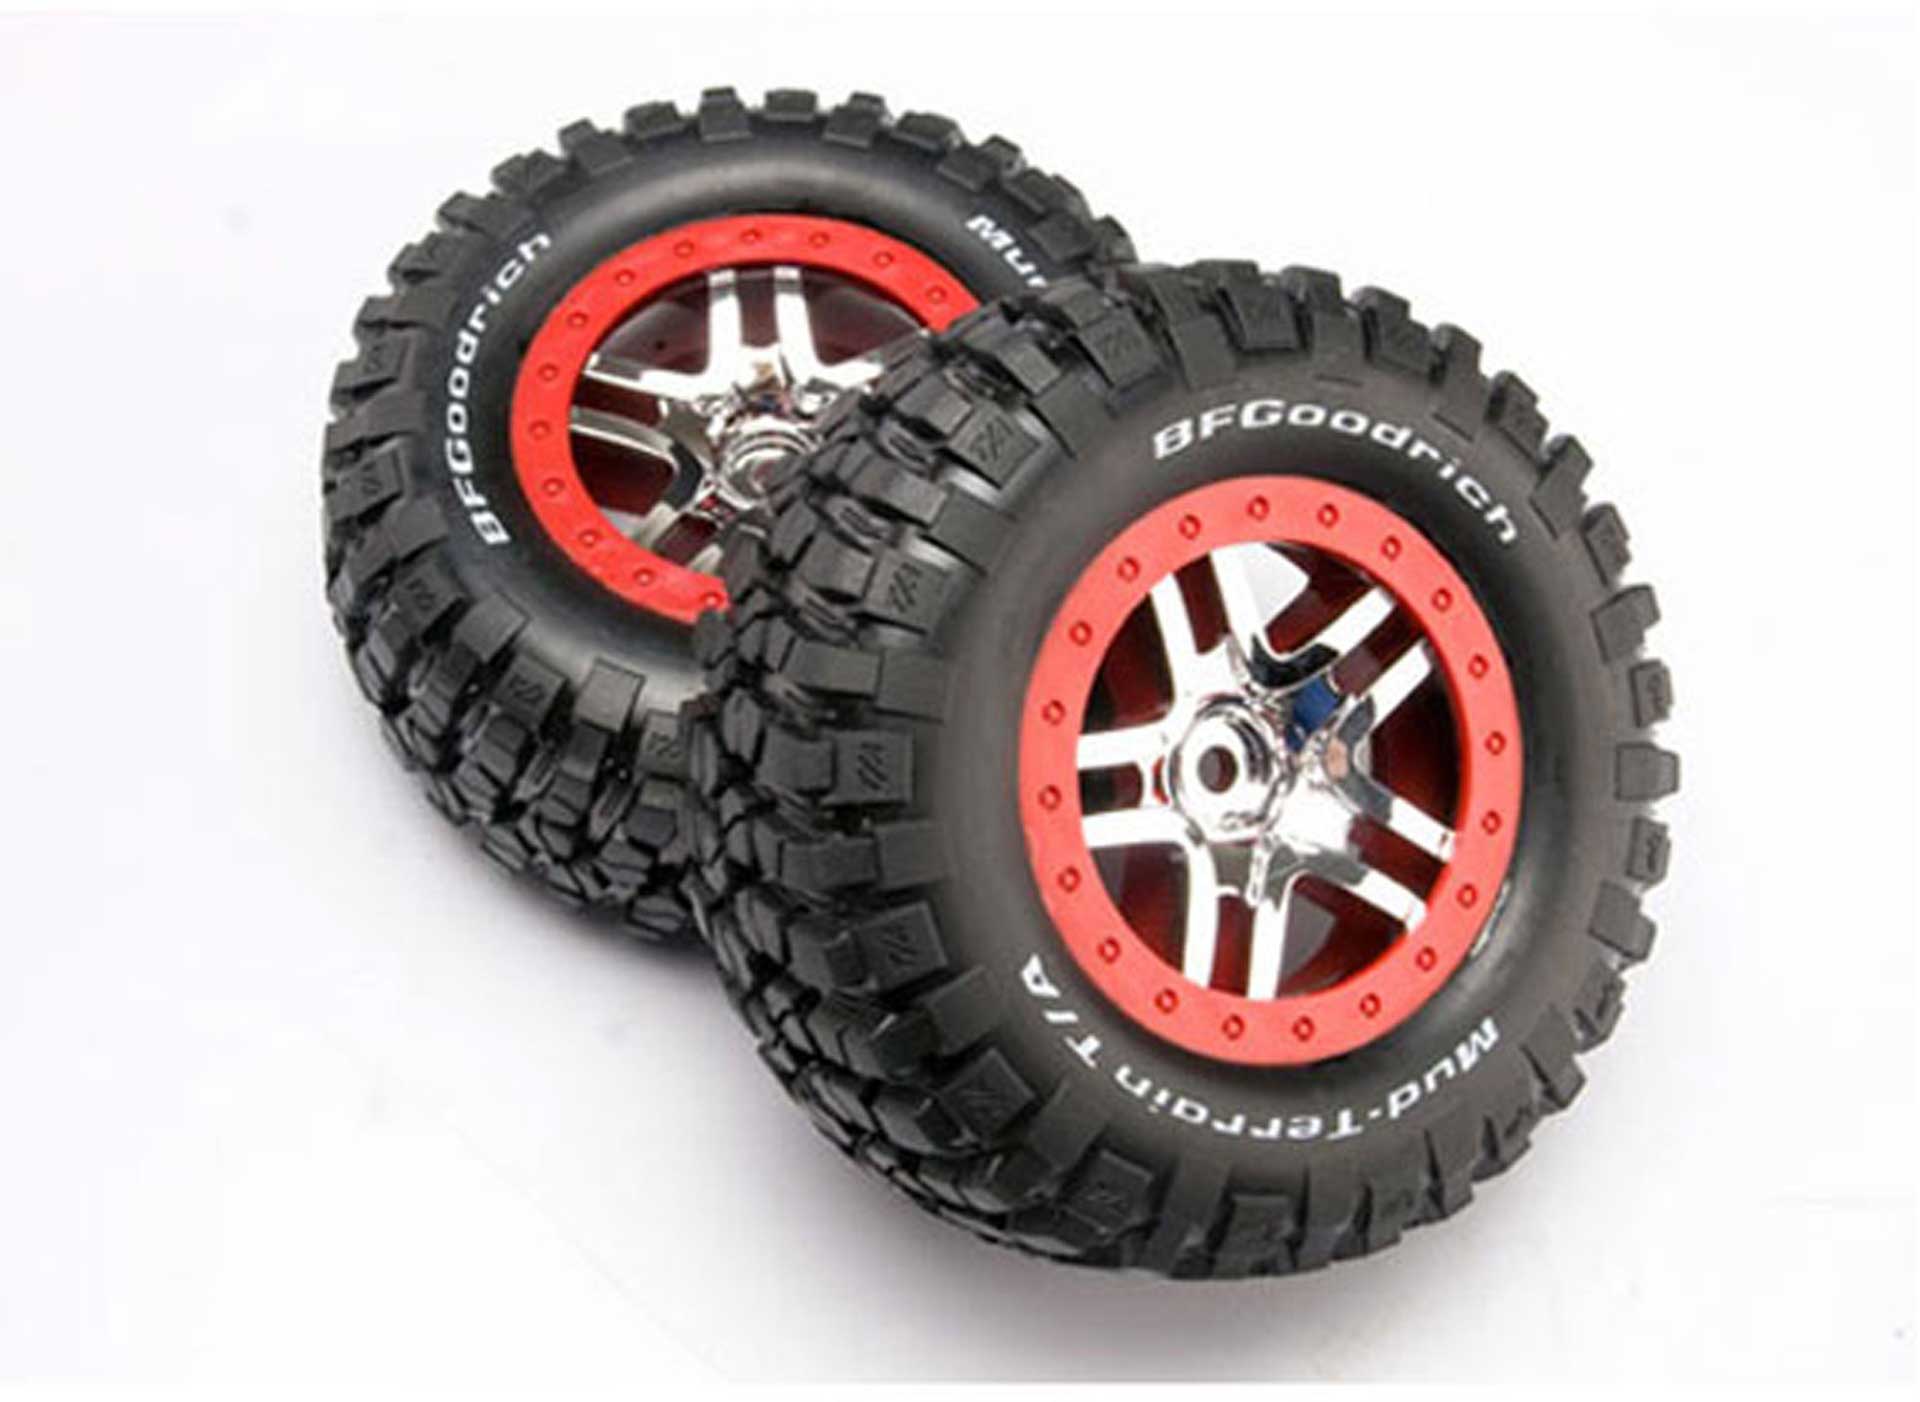 TRAXXAS ROUES MONTEES COLLEES BF GOODRICH POUR 4X4 AV/ARR-4X2 ARRIERE (2)